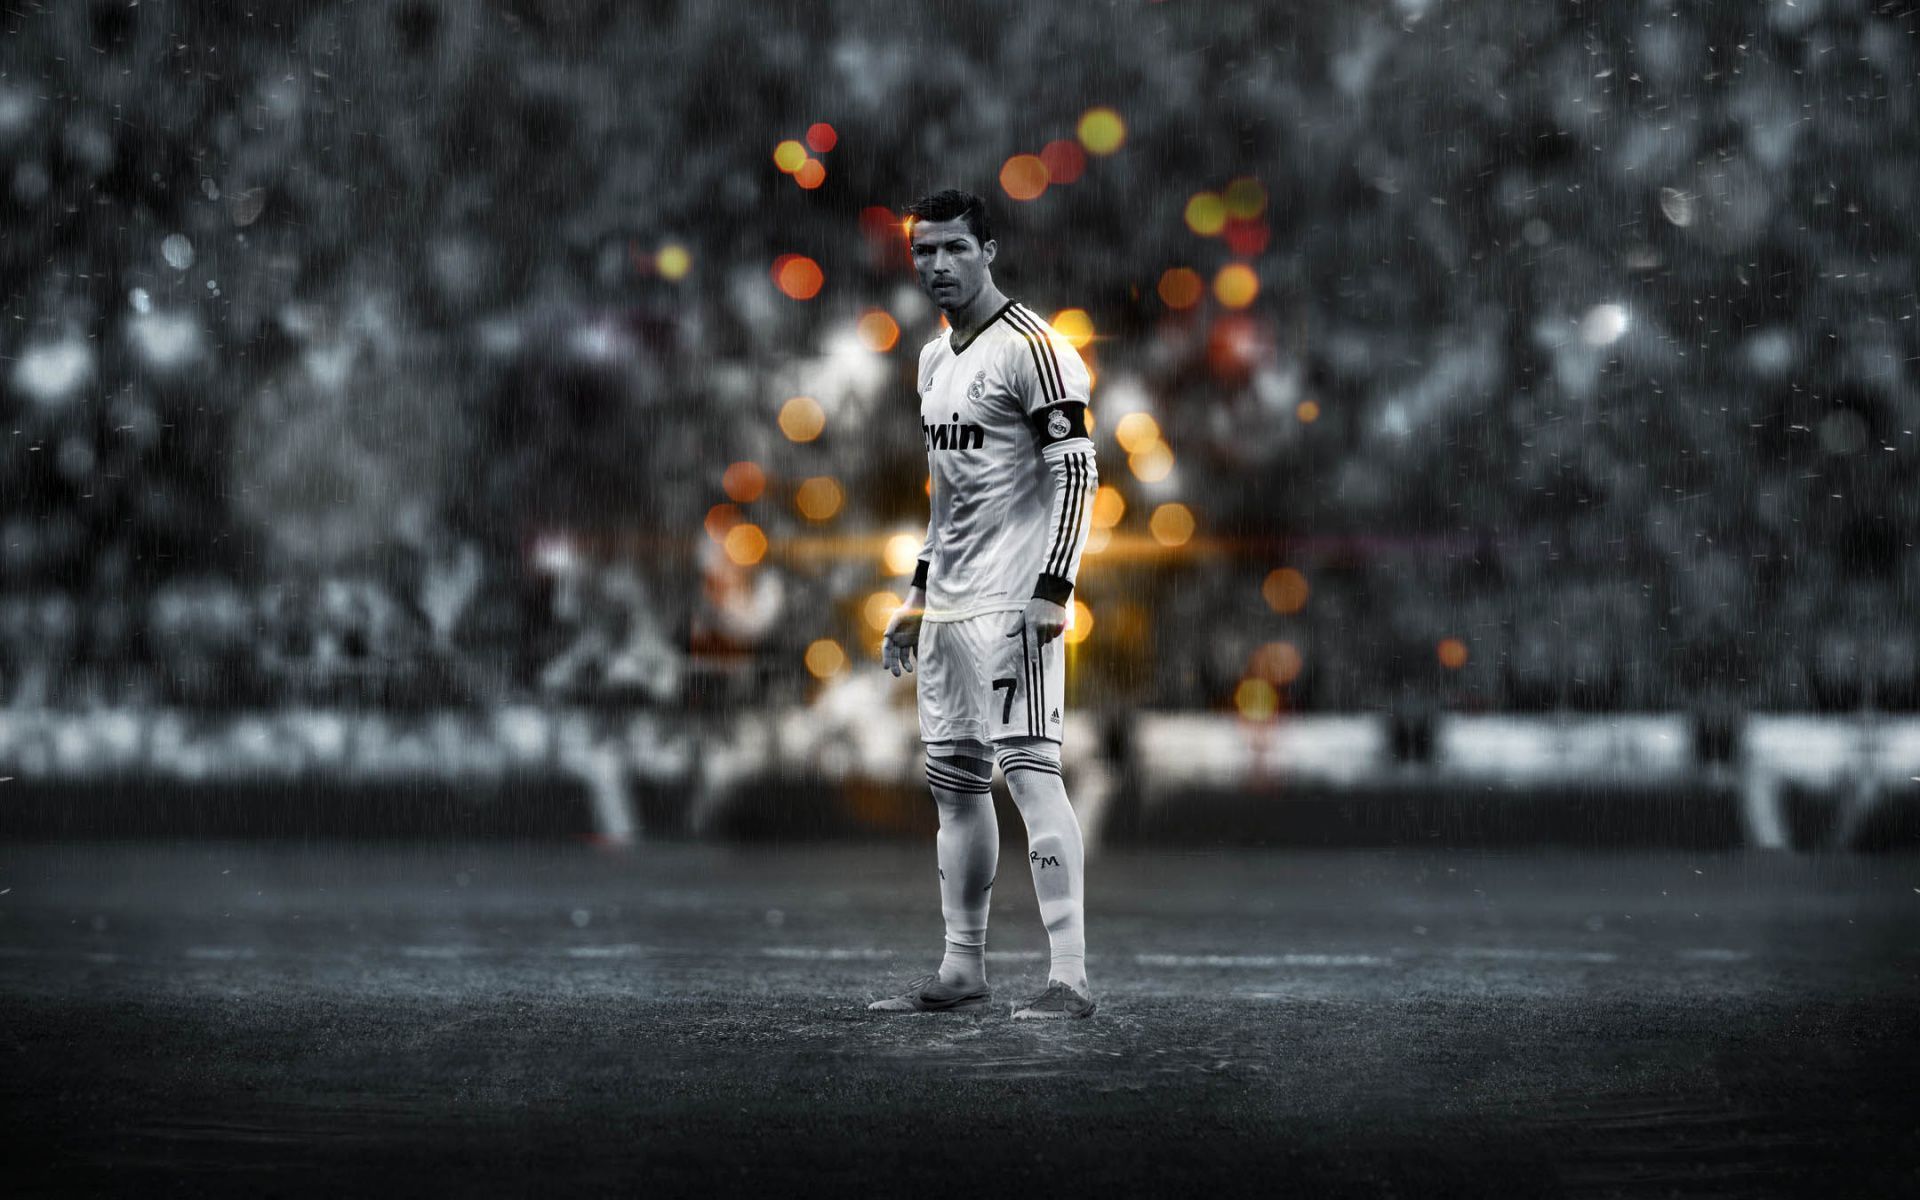 Christiano ronaldo real madrid Wallpapers | Pictures